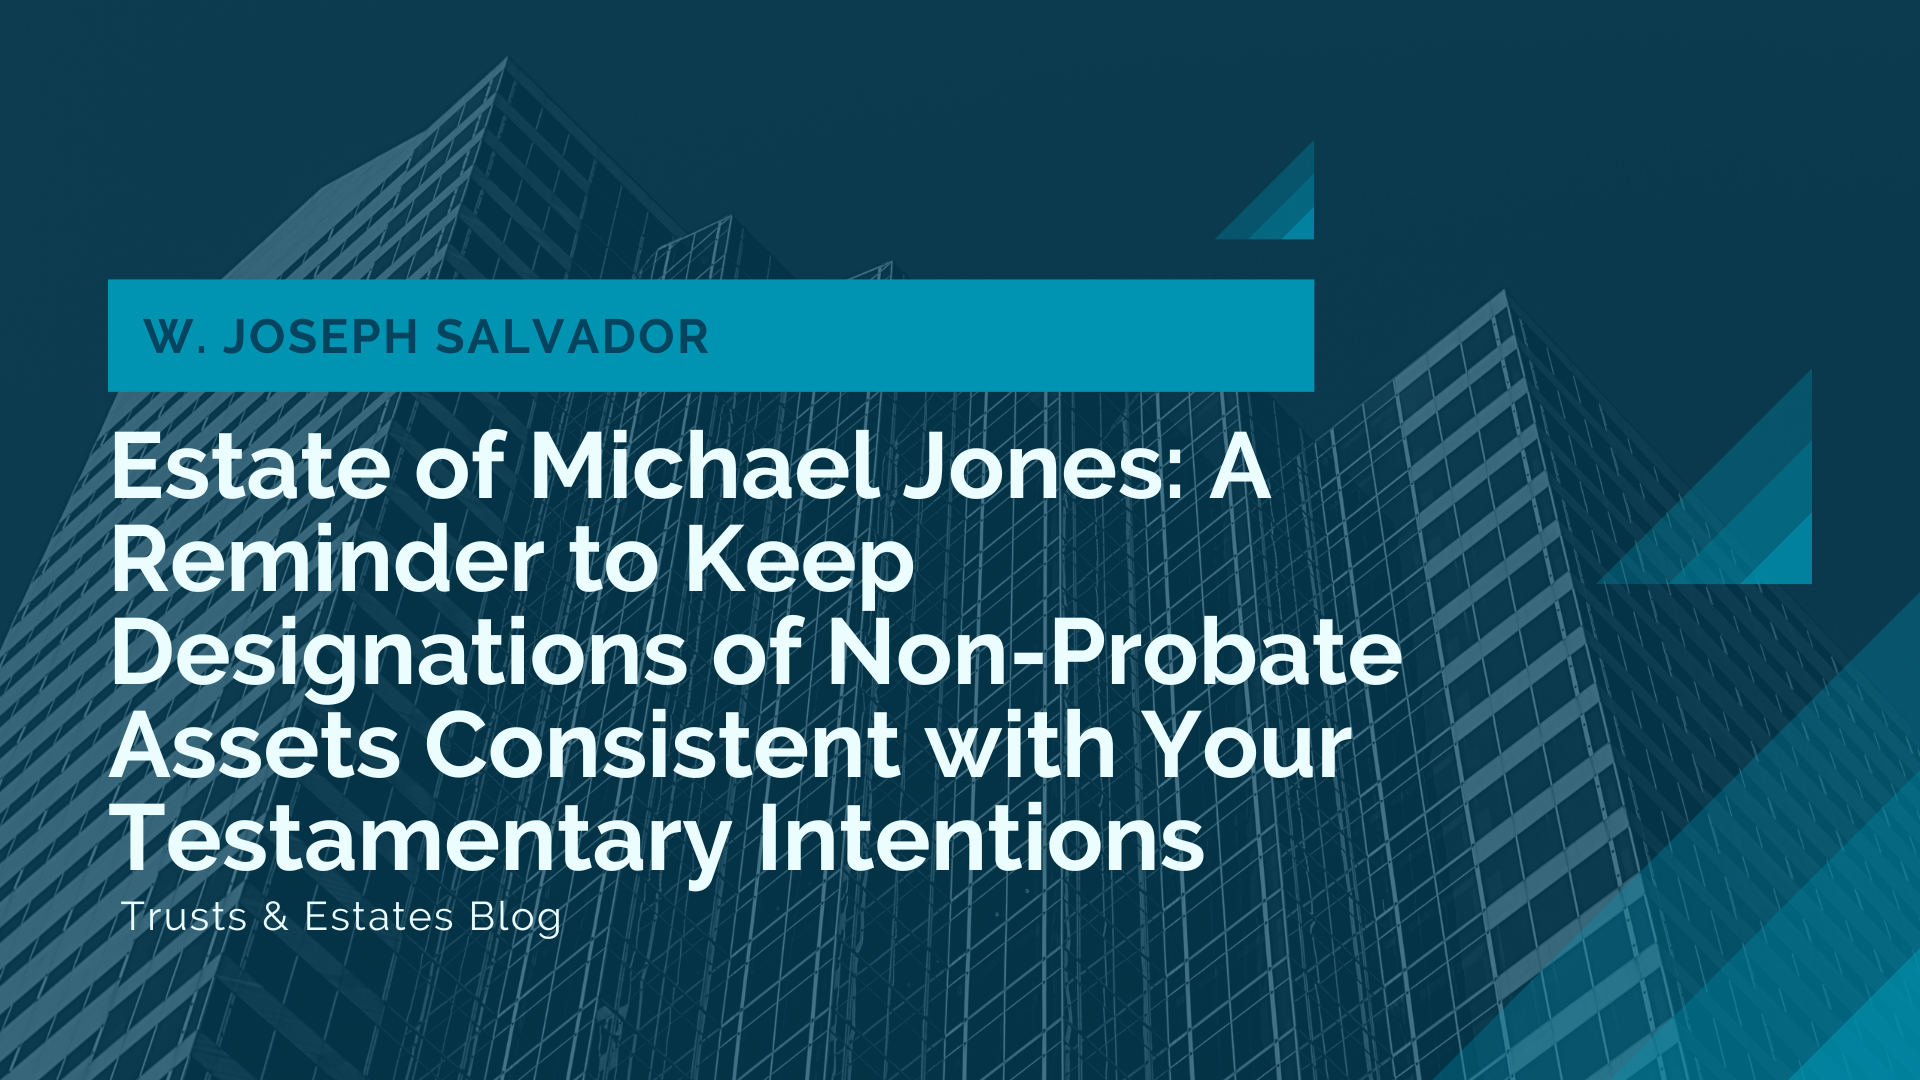 Estate of Michael Jones: A Reminder to Keep Designations of Non-Probate Assets Consistent with Your Testamentary Intentions